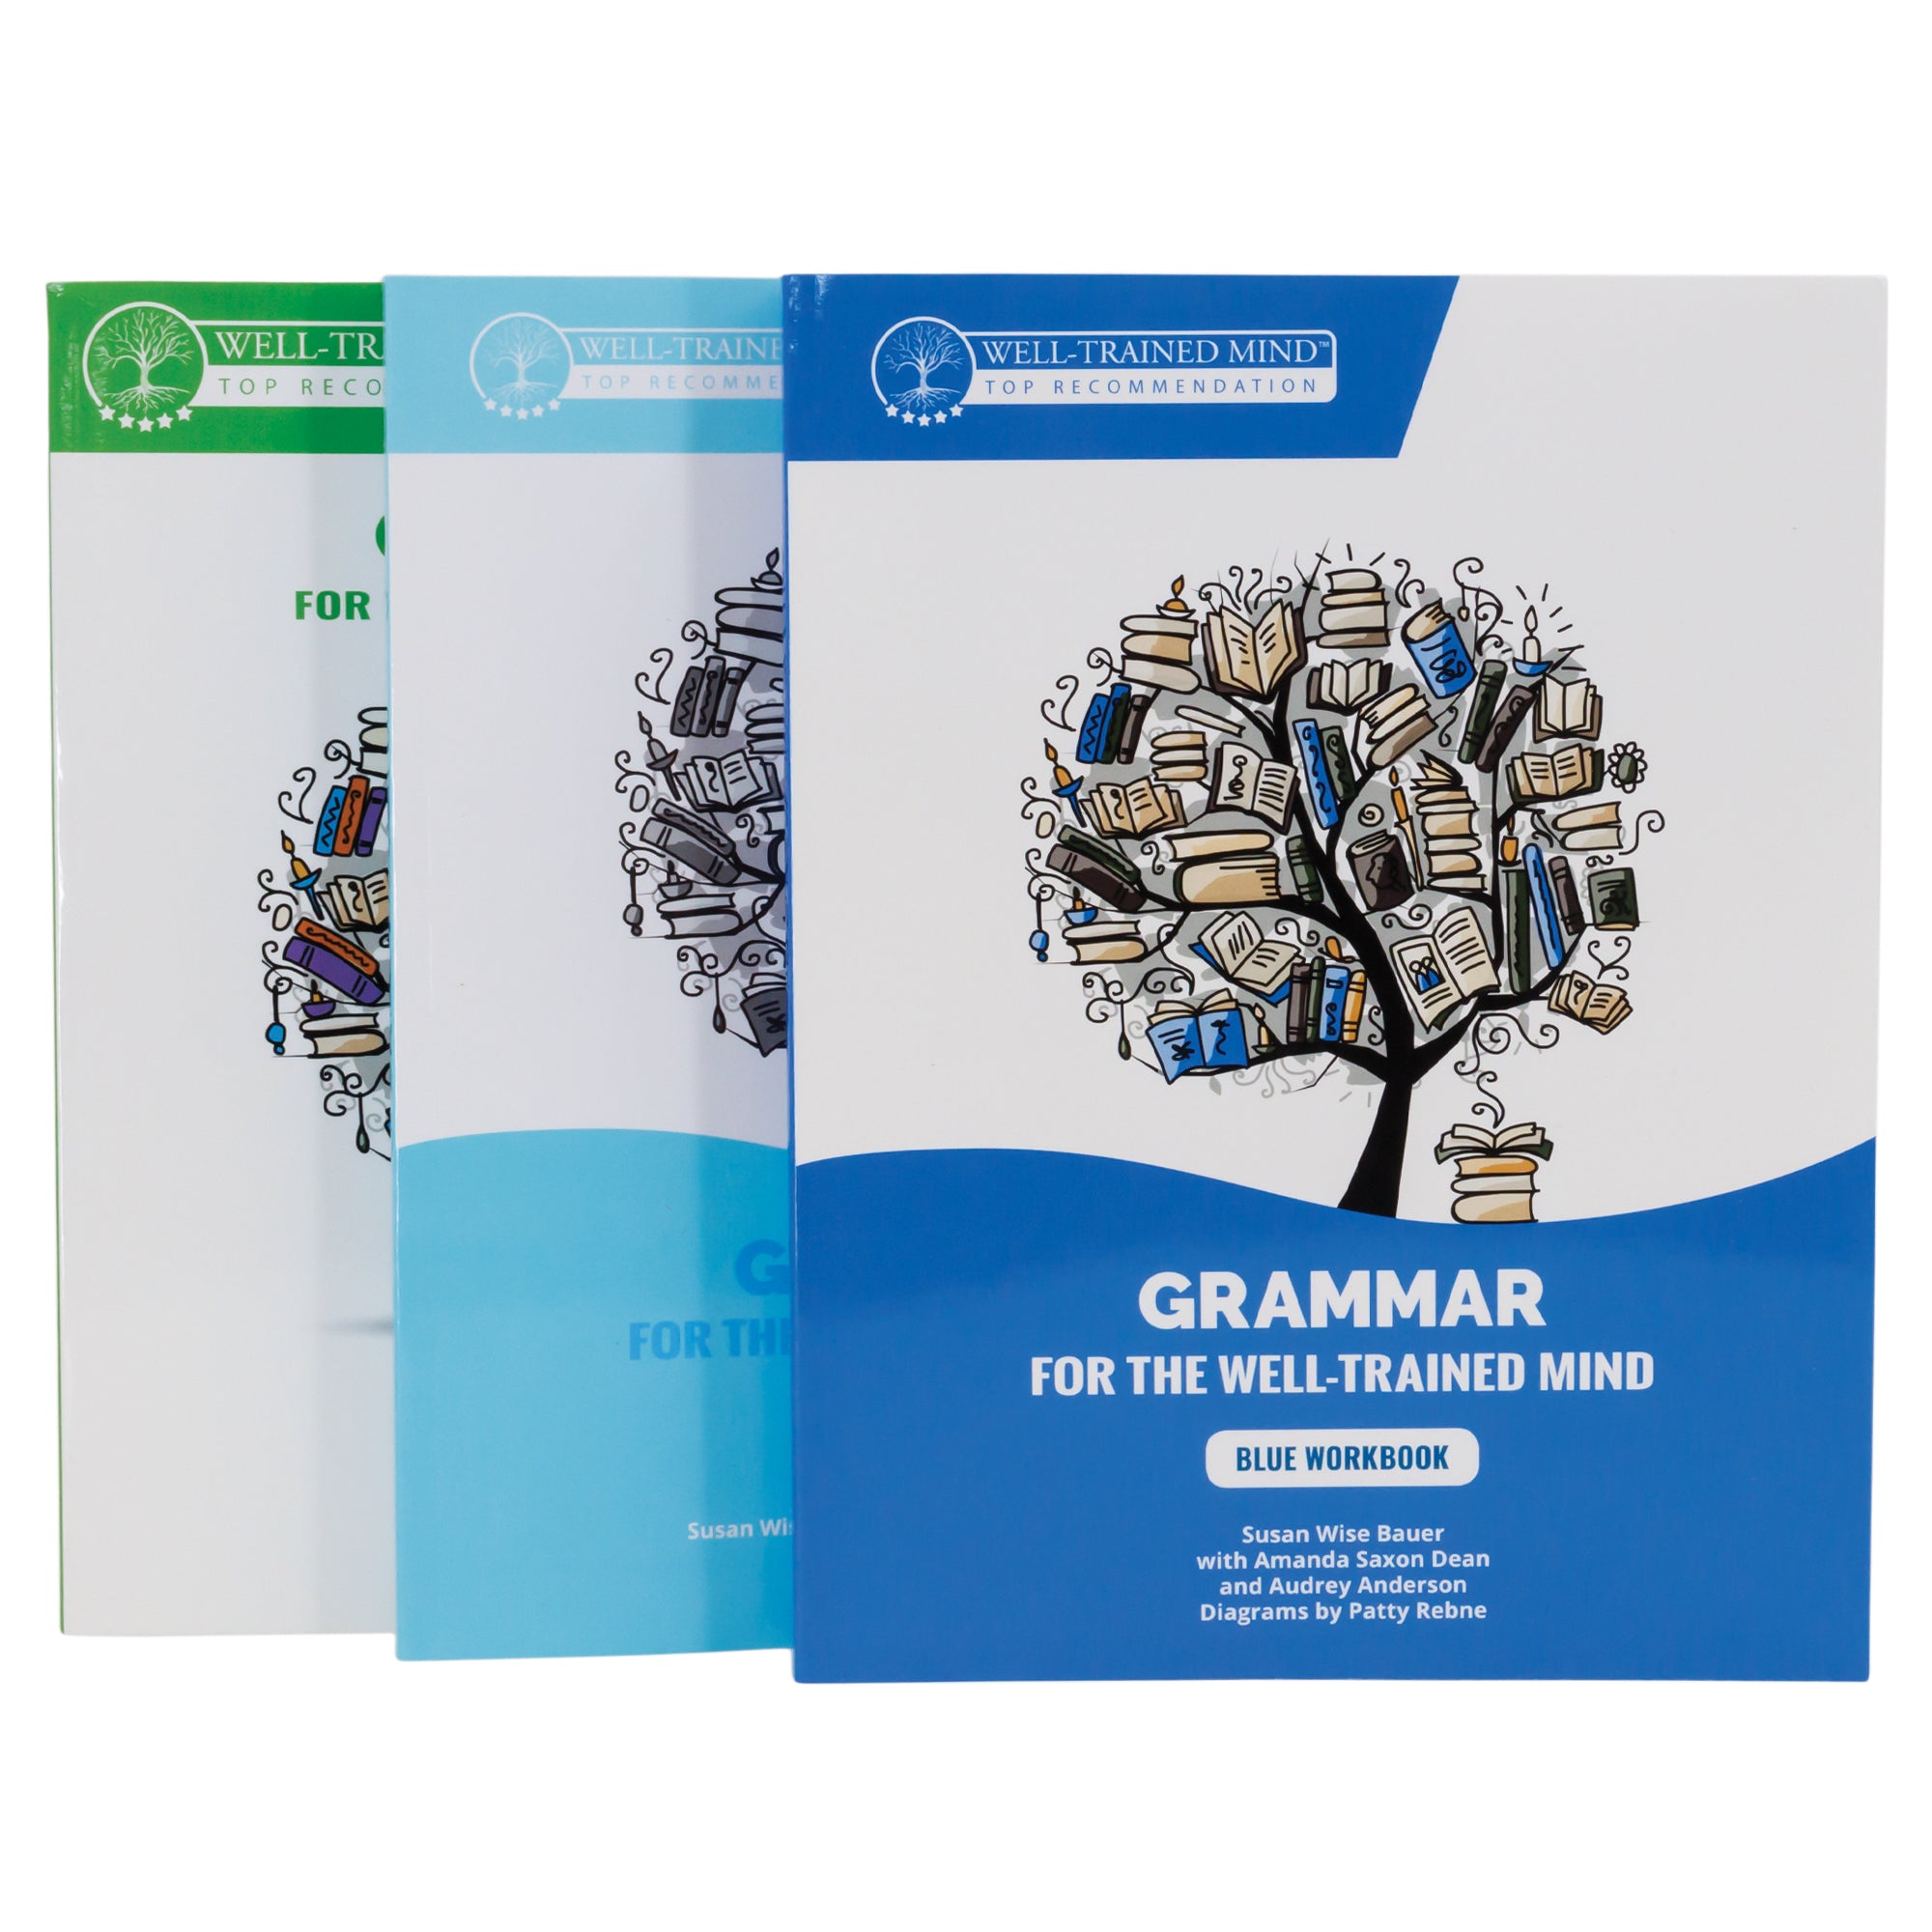 Grammar for the Well-Trained Mind Blue bundle of 3 books. The front book has a white top and a blue bottom with a wave shape between the 2 colors. There is an illustration in the white section of a tree with books for leaves and a stack of books near the trunk. In the blue section at the bottom is white text, including the title and “Blue Workbook.” Tucked behind the blue book is a lighter blue version of this book, then a green version behind the light blue book.